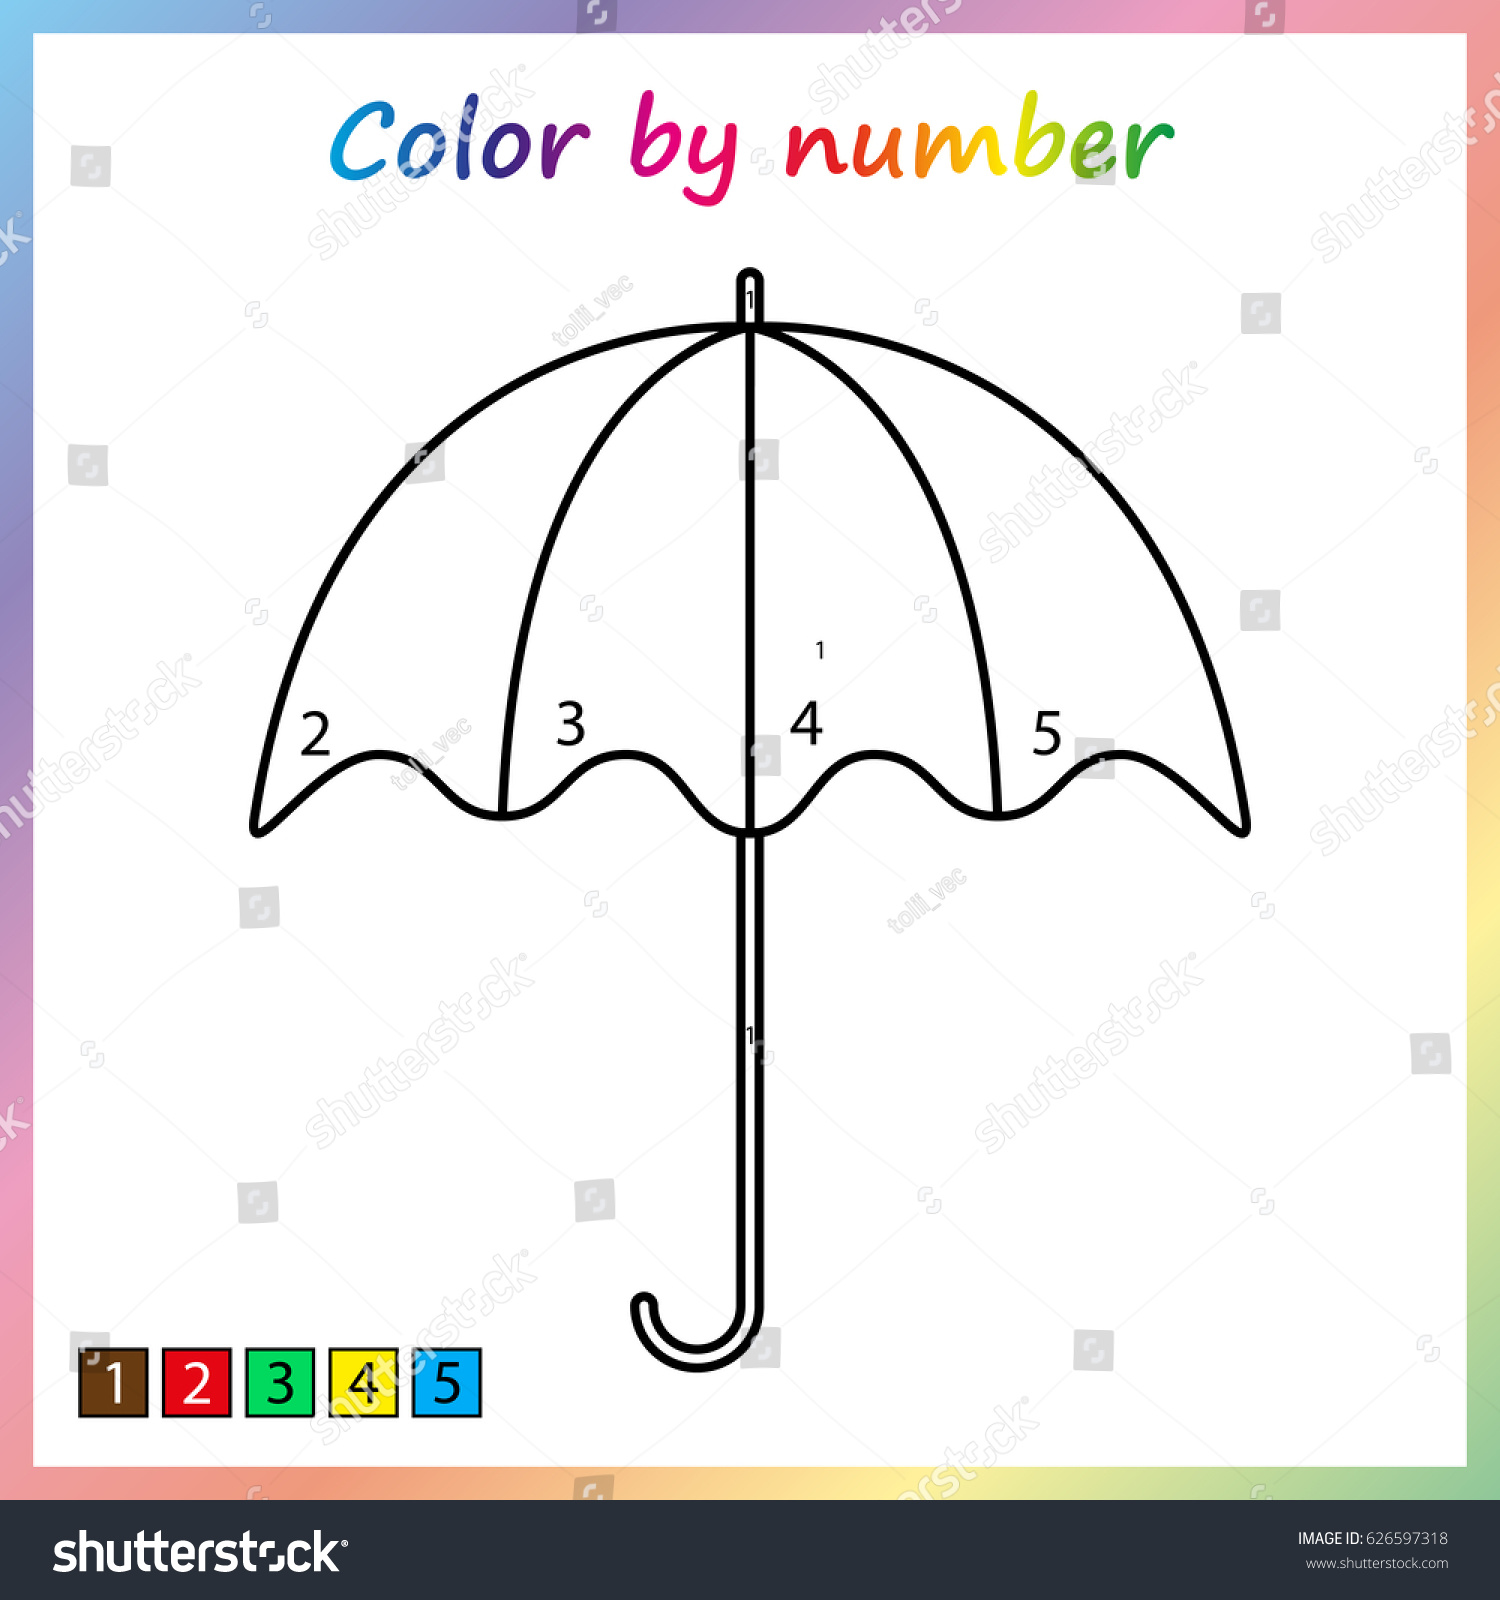 stock vector umbrella painting page color by numbers worksheet for education game for preschool kids 626597318